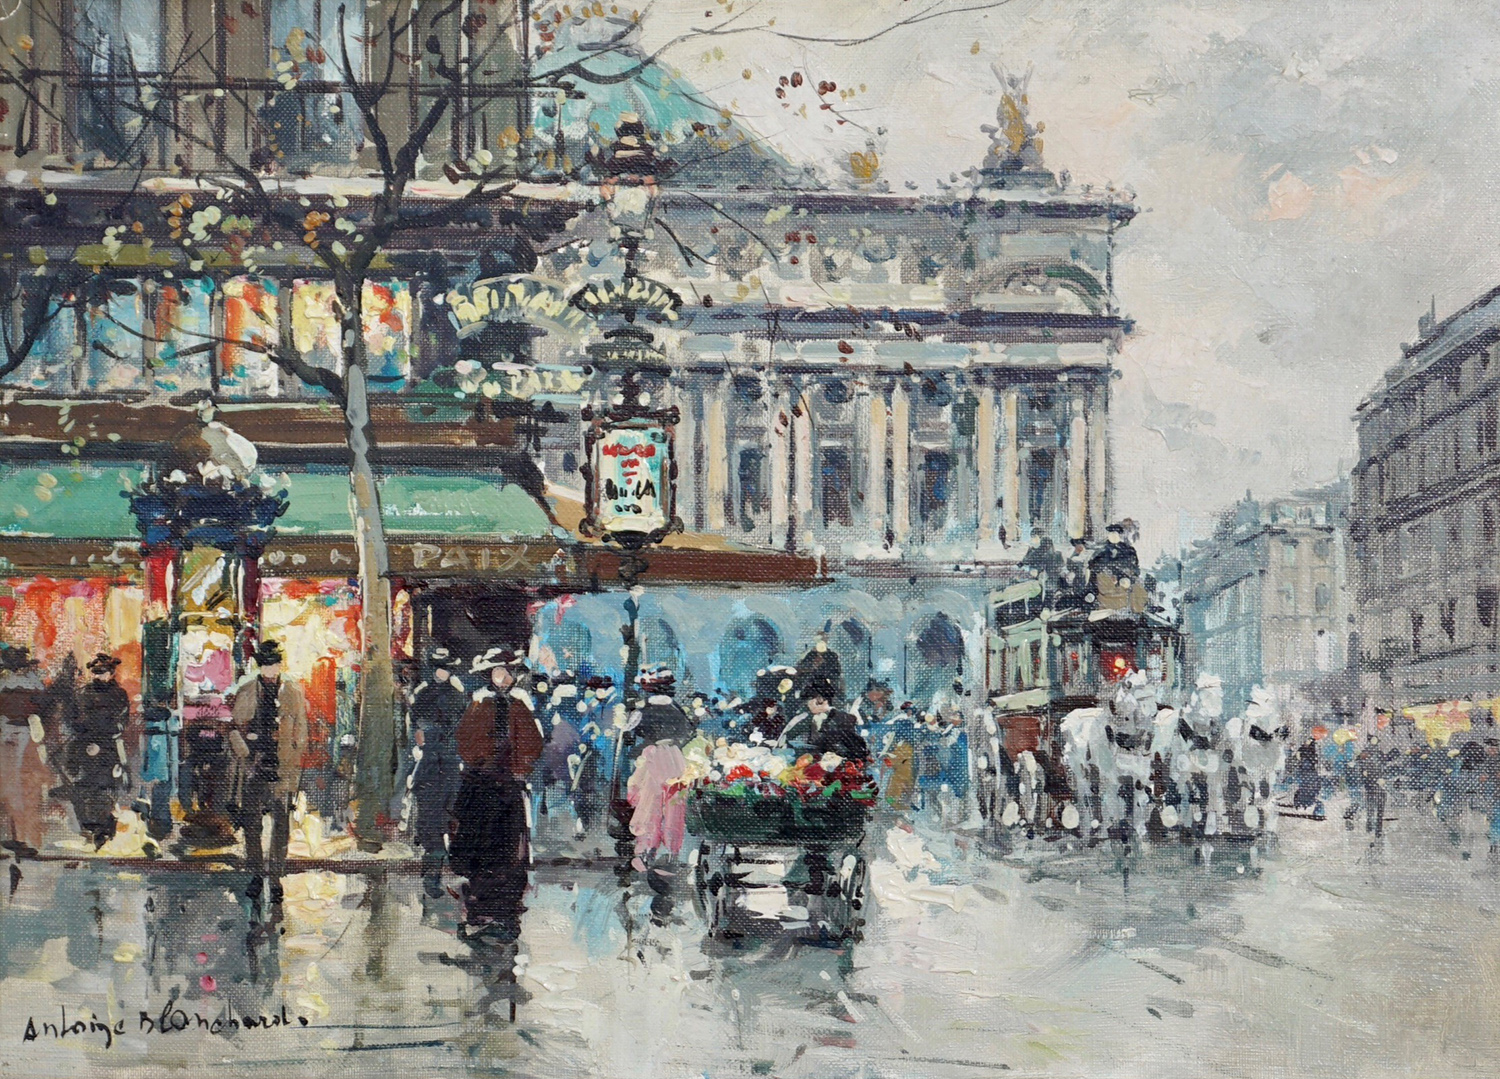 painting of cafe de la paix and the opera house in paris with people and horses on the street